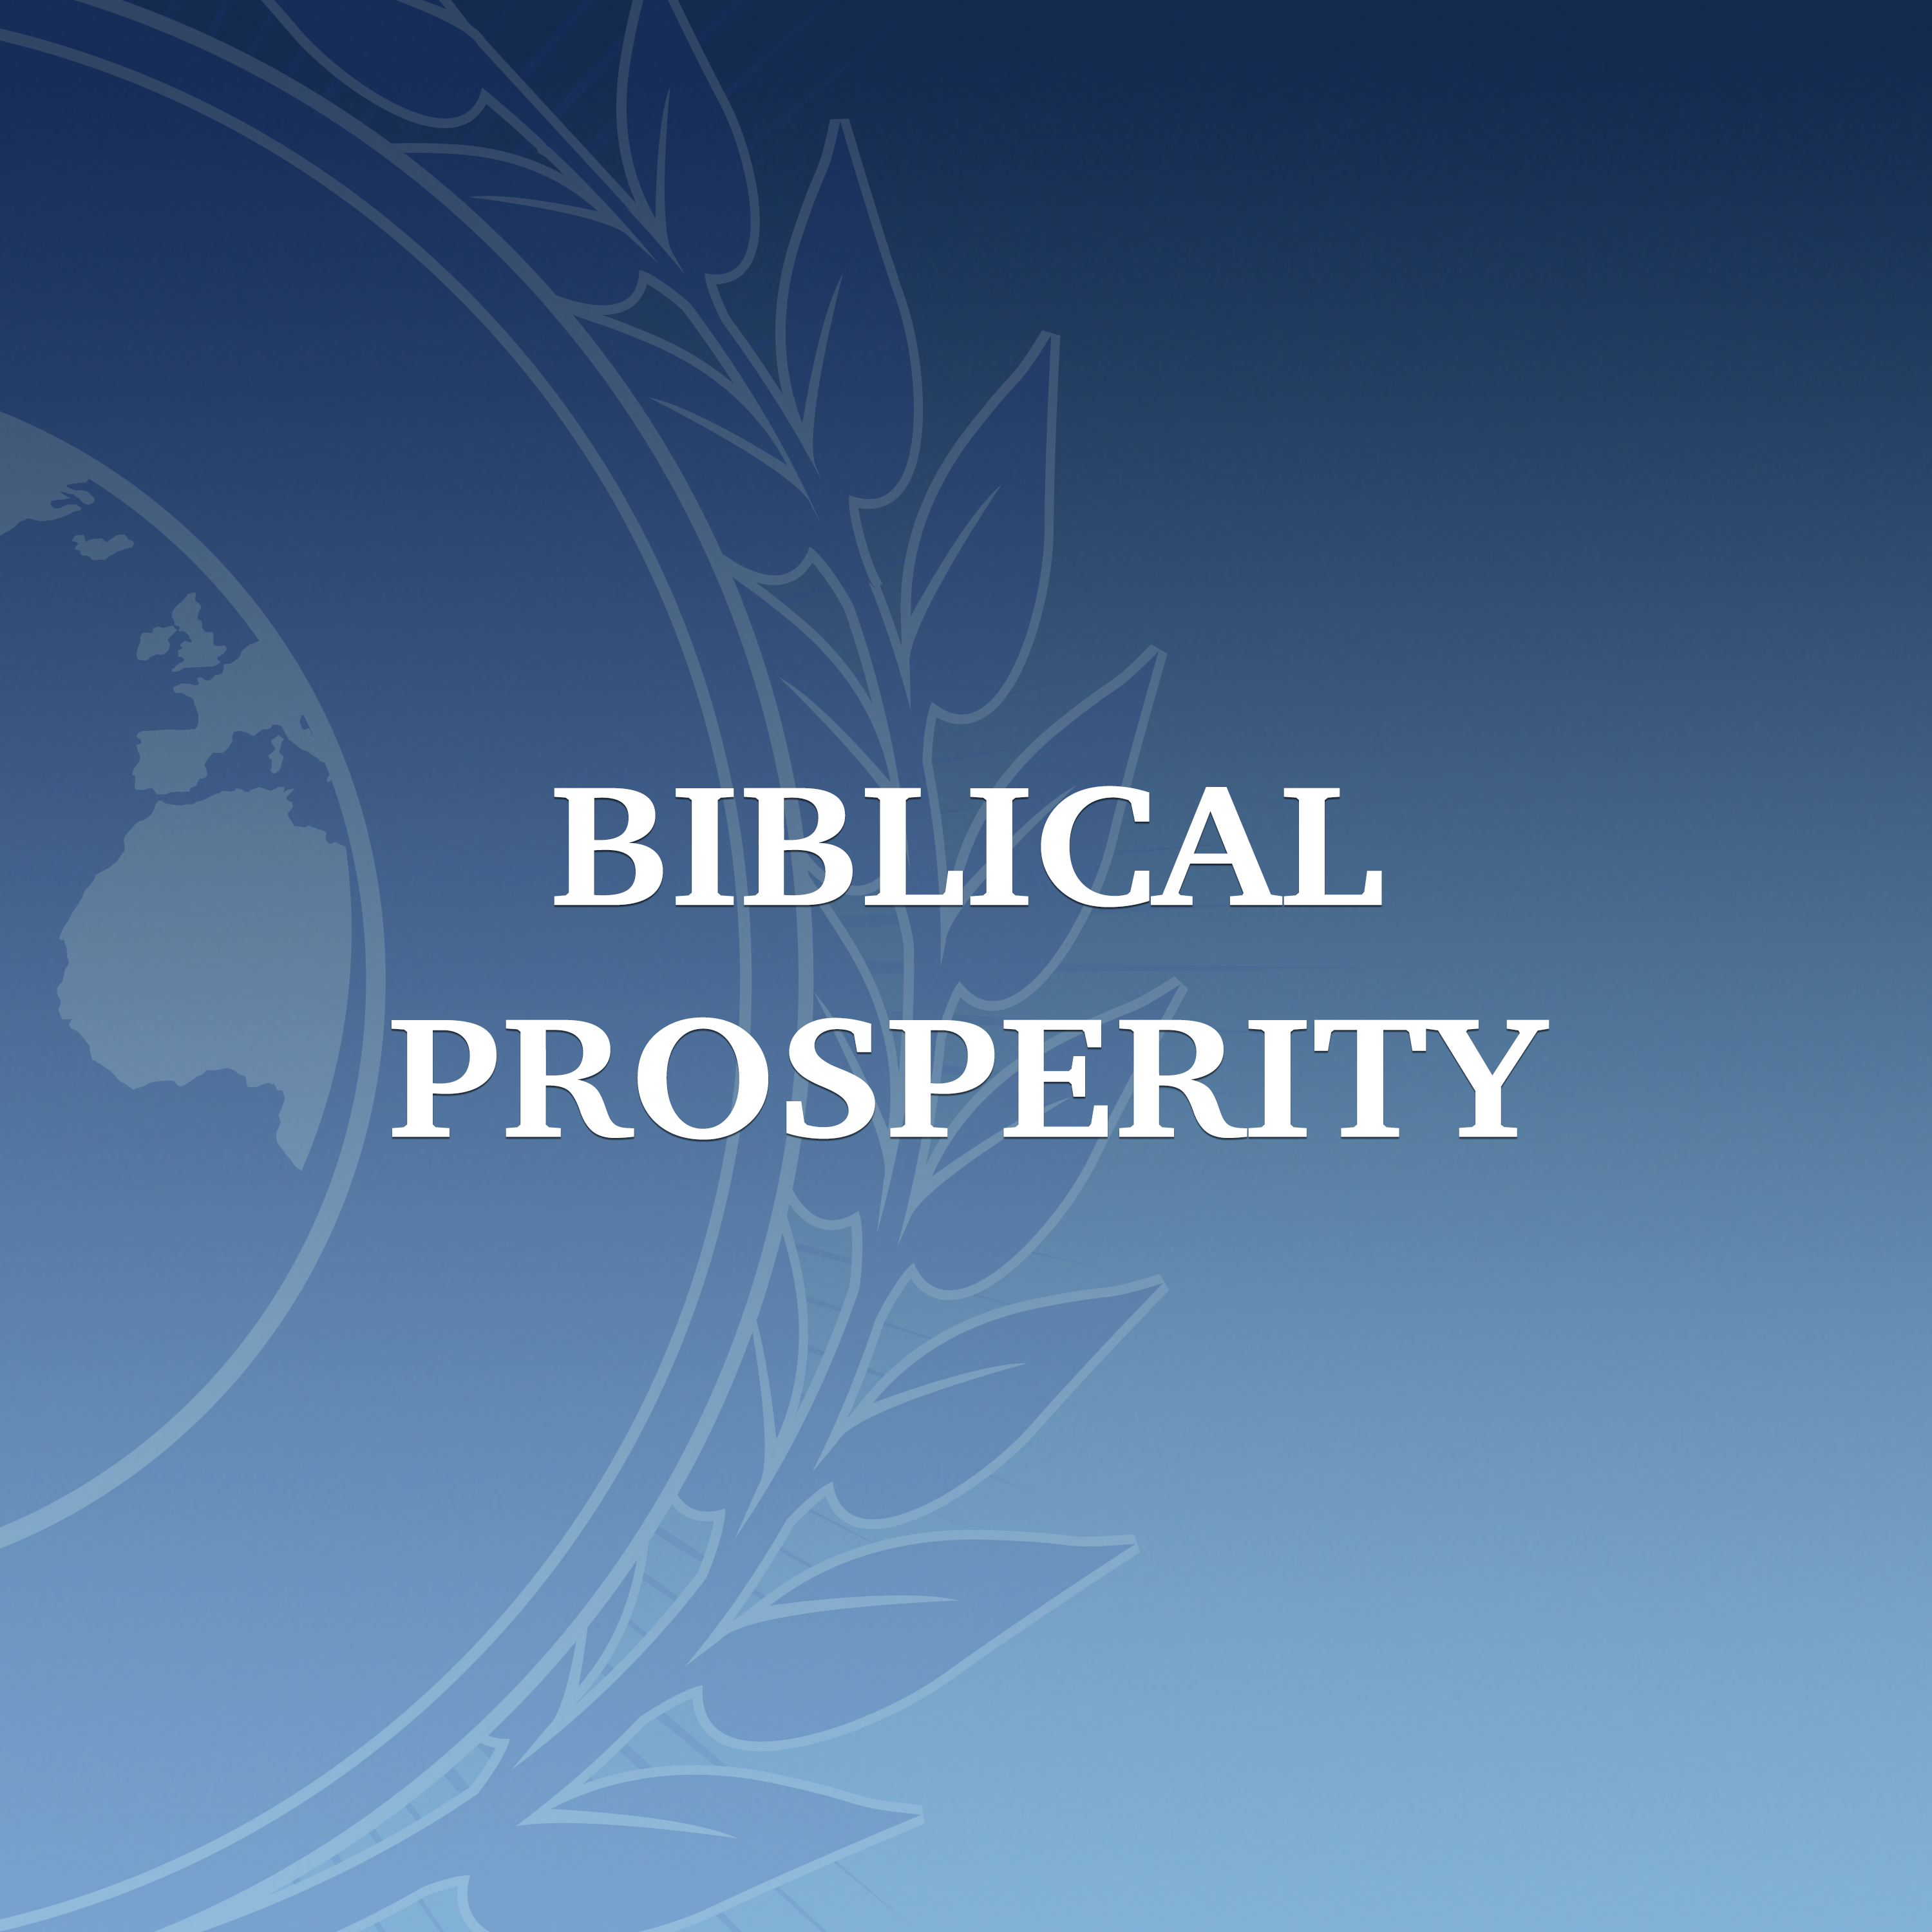 Featured image for “Biblical Prosperity”